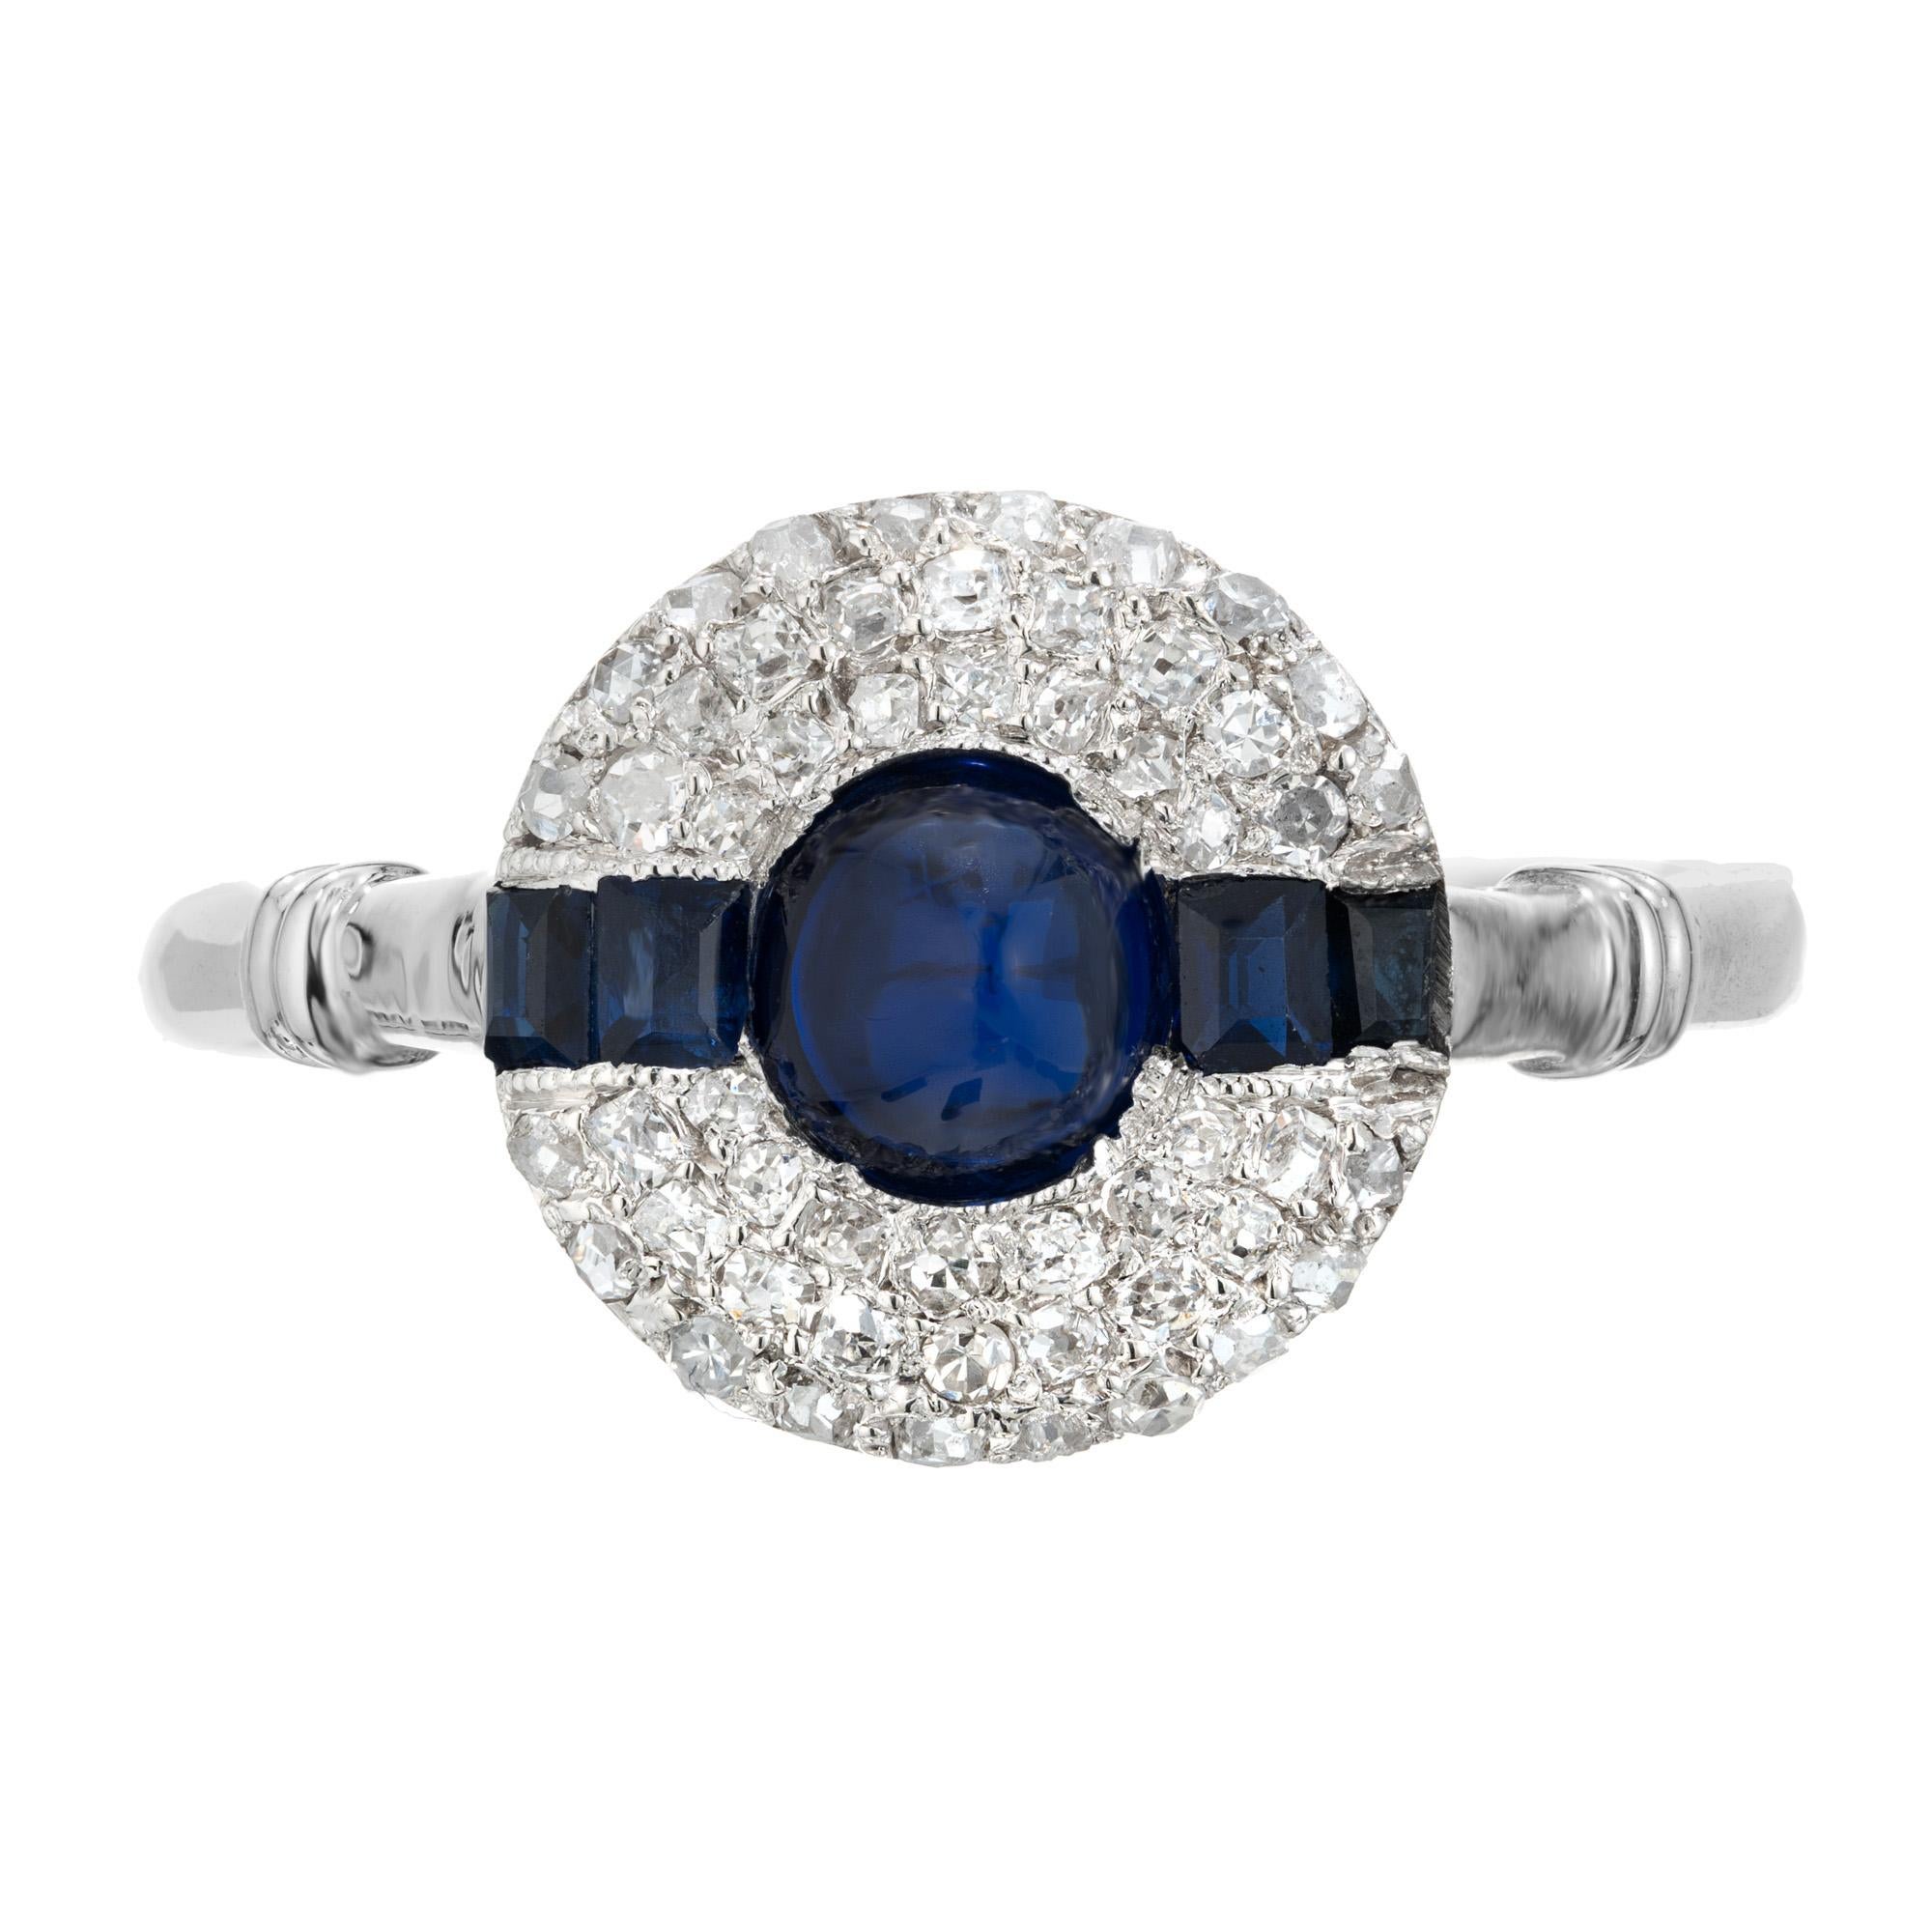 1920's Art Deco handmade sapphire and diamond engagement ring. GIA certified round, sugar loaf center sapphire, mounted in a platinum setting with a triple pave diamond cluster halo and 2 square cut sapphires on each side of the center stone. The